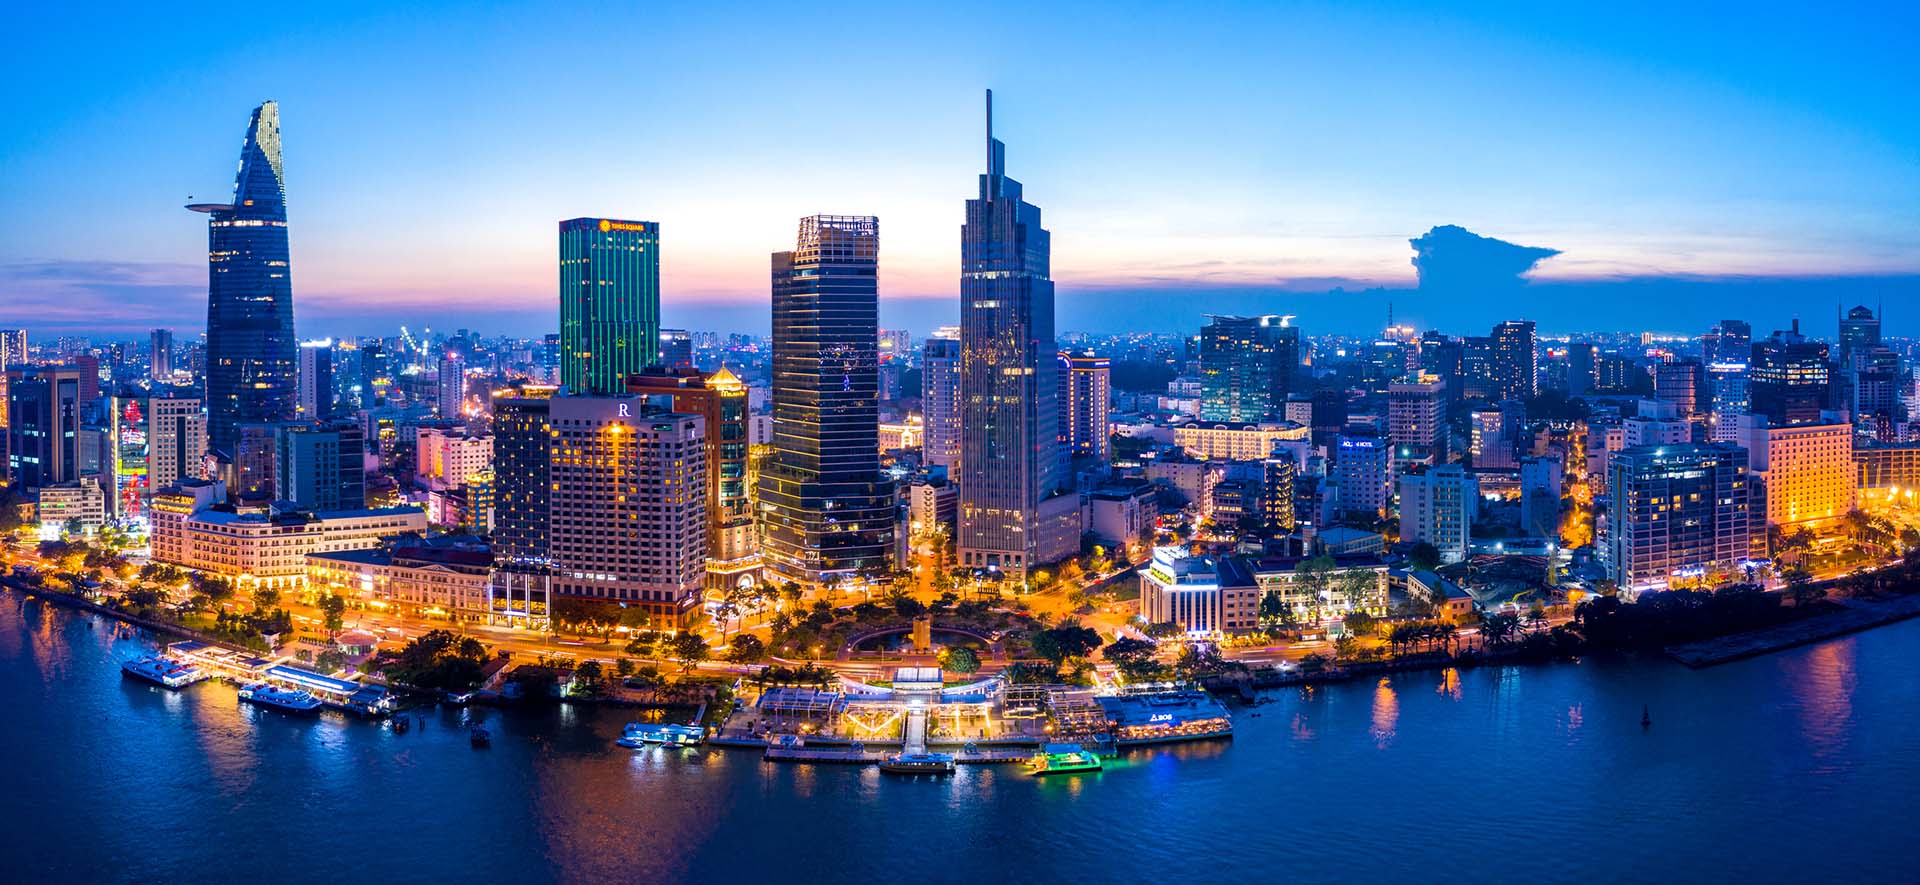 Ho Chi Minh is the most populous city in Vietnam